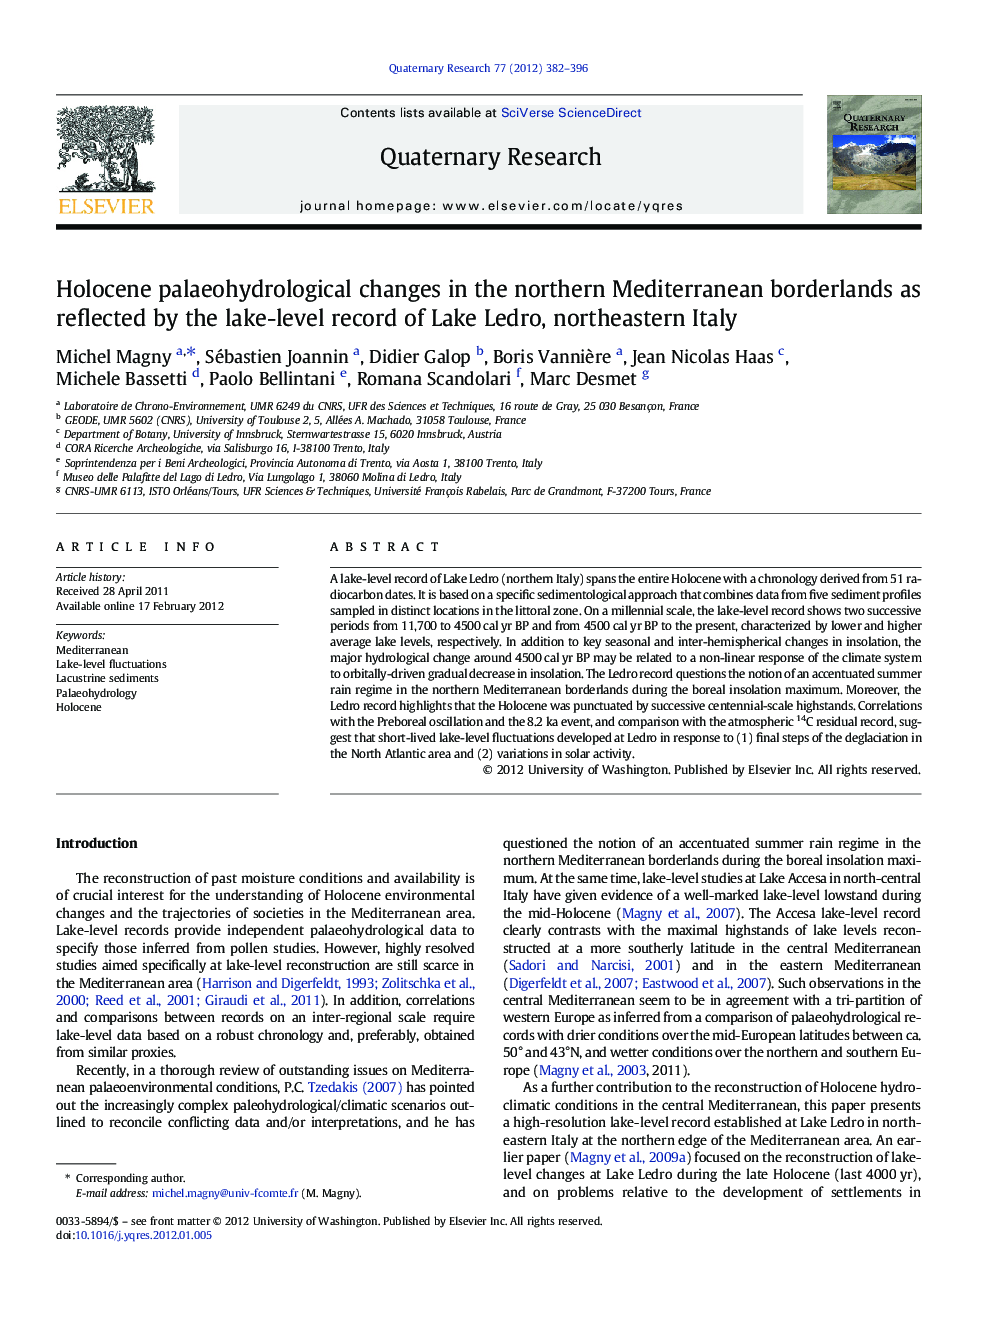 Holocene palaeohydrological changes in the northern Mediterranean borderlands as reflected by the lake-level record of Lake Ledro, northeastern Italy